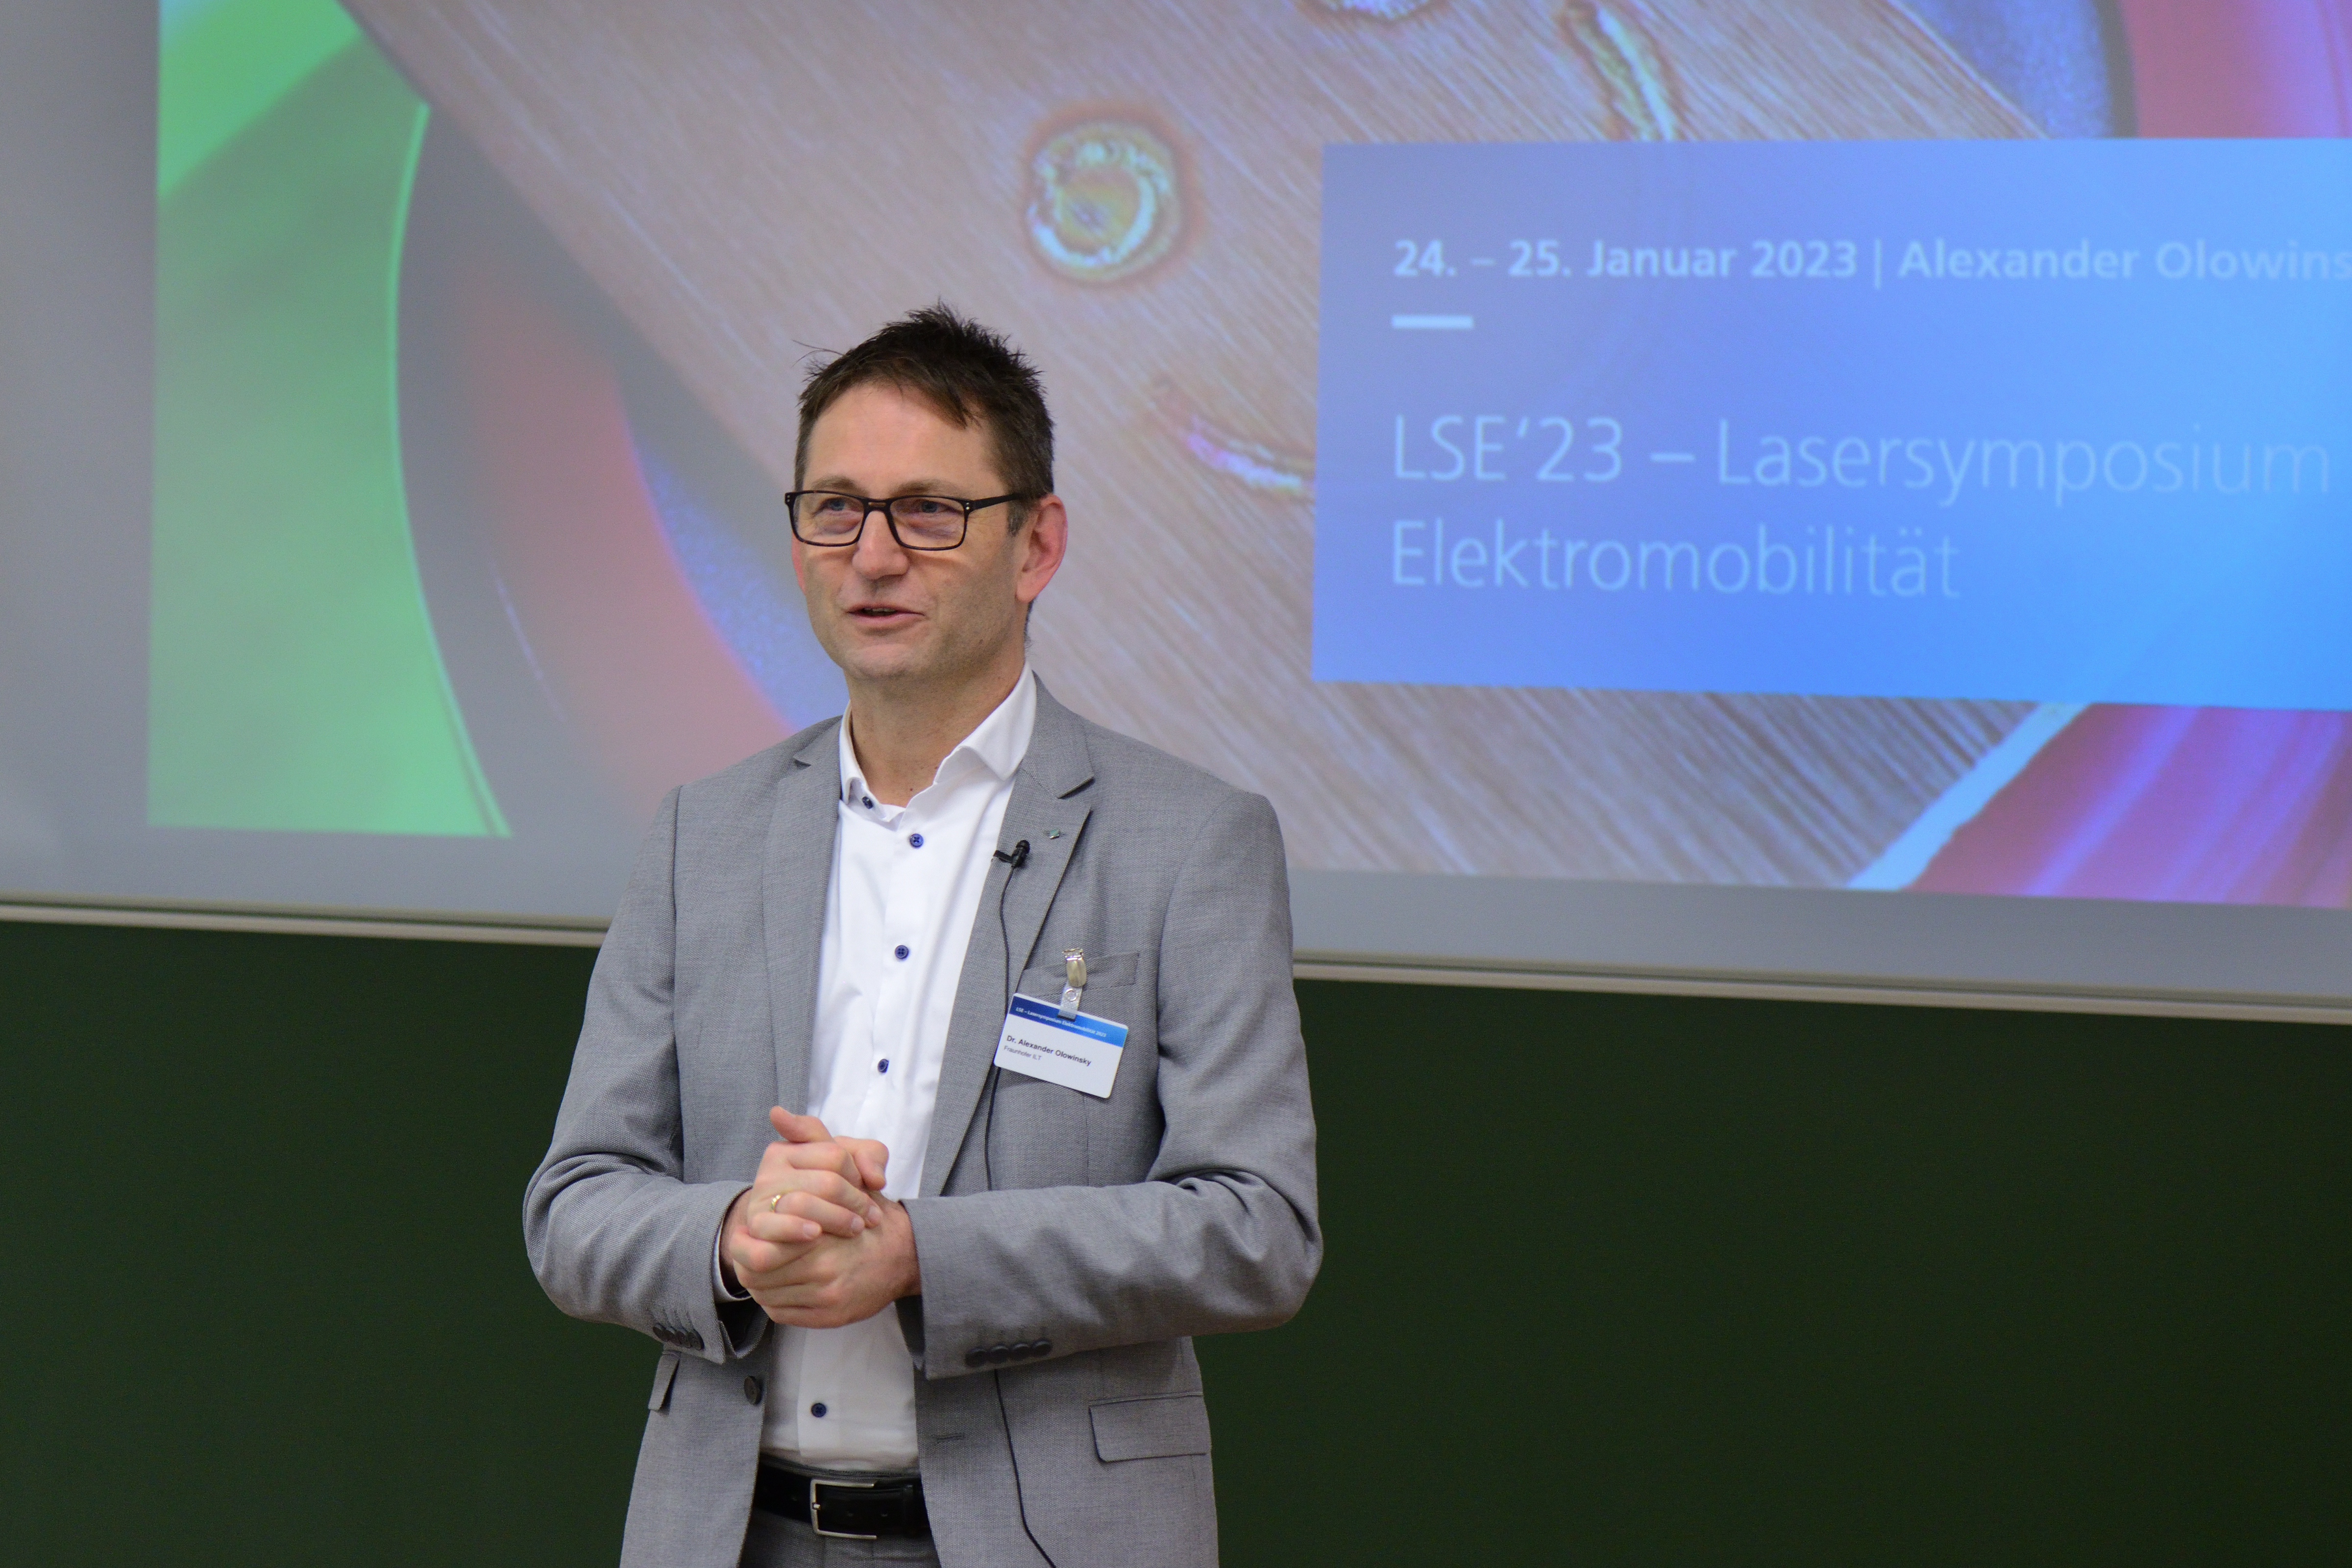 Dr. Alexander Olowinsky, Head of department Joining and Cutting at Fraunhofer ILT: "We evaluated the idea, produced the first samples and supported the Finnish start-up Aurora Powertrains in its further development. Now we are supporting them in implementing it for large-scale production."